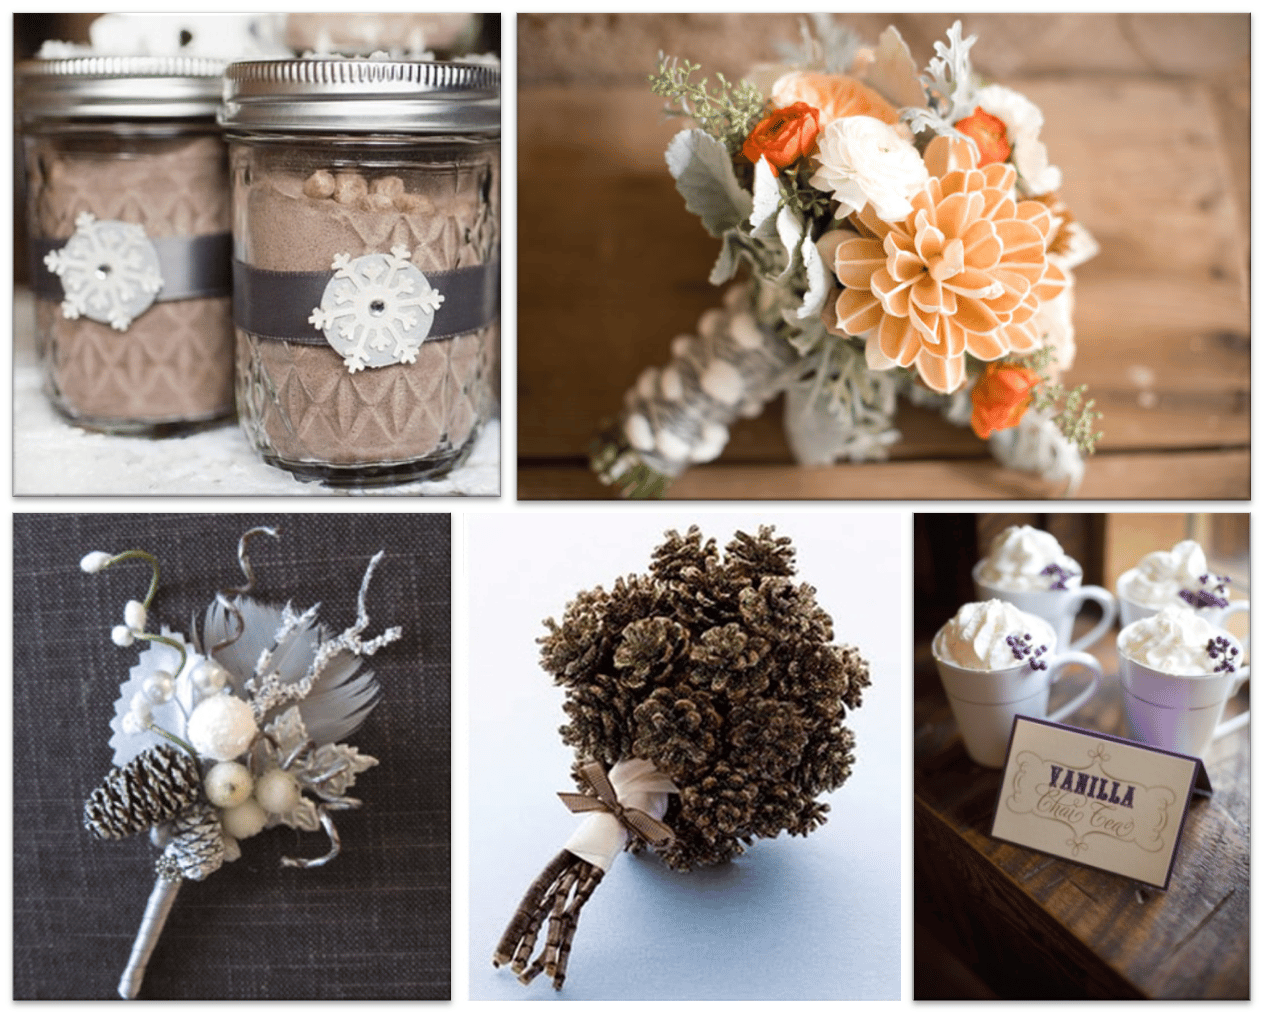 collage of winter wedding items including bouquets, boutonnieres, and mugs of vanilla chai tea